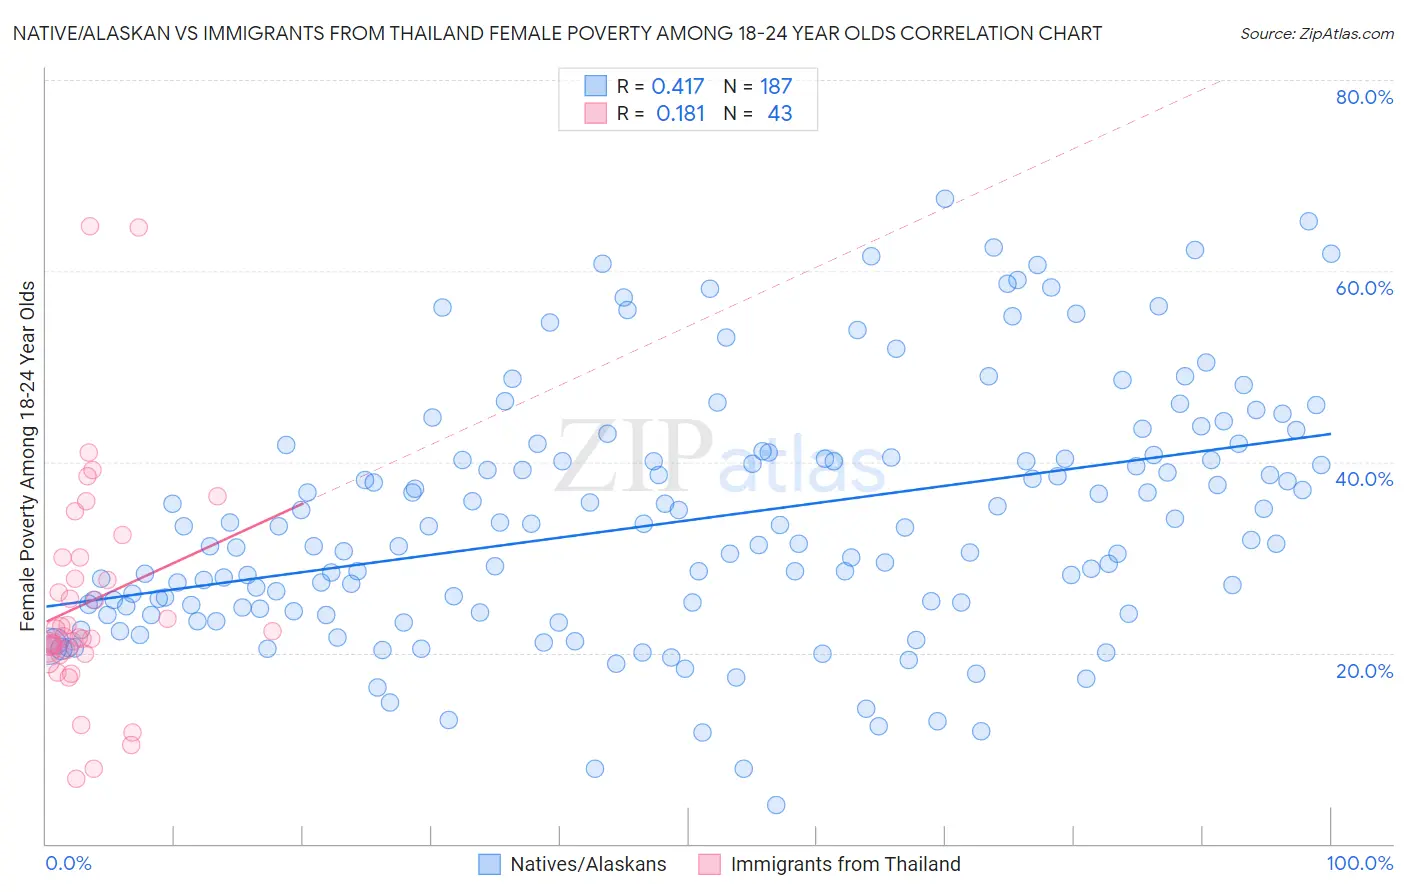 Native/Alaskan vs Immigrants from Thailand Female Poverty Among 18-24 Year Olds